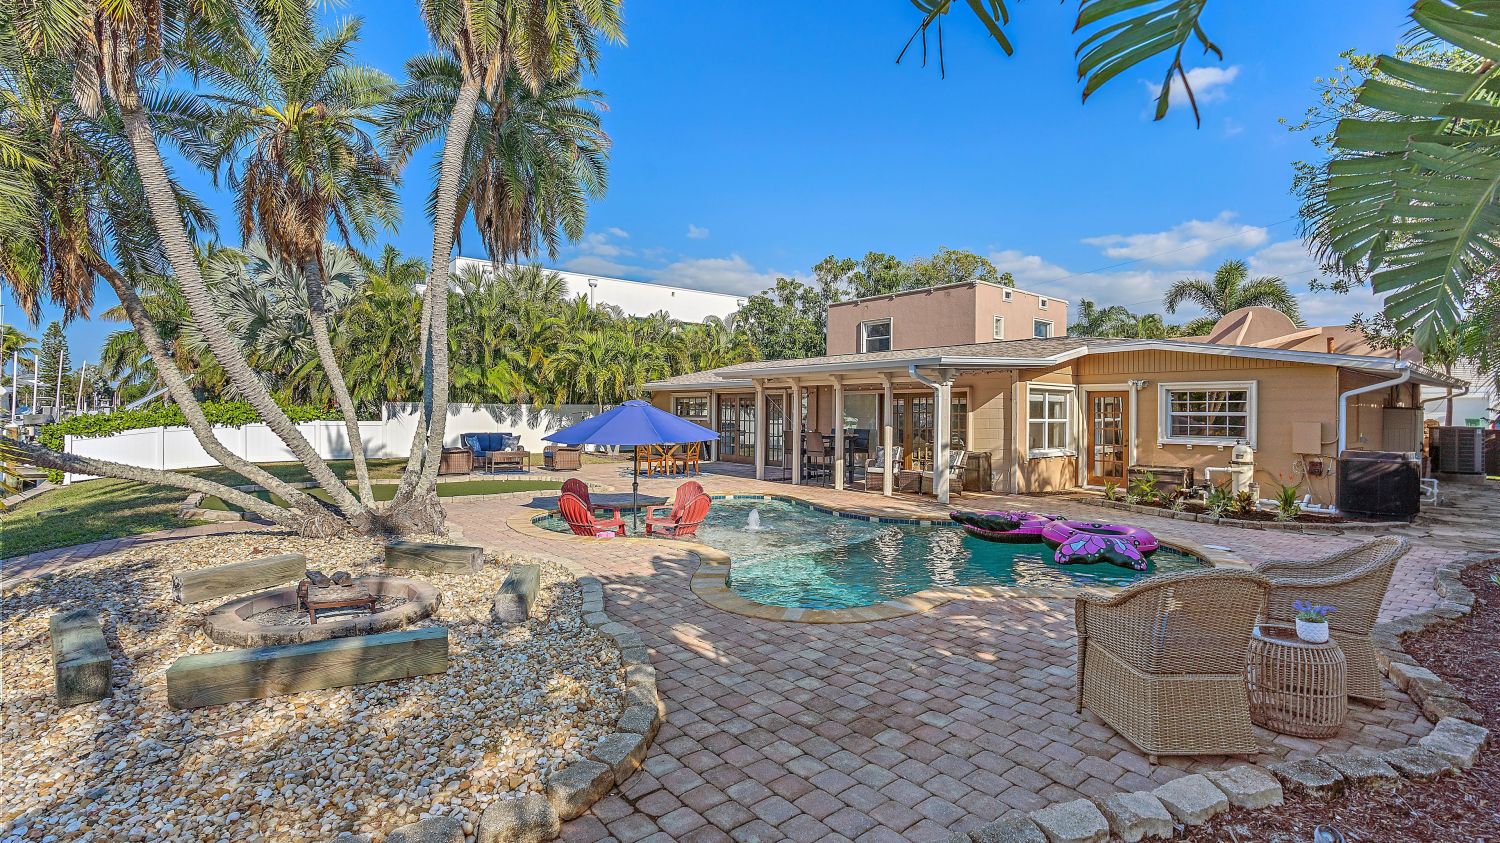 Backyard Oasis - Private backyard with pool, fire pit and outdoor seating.